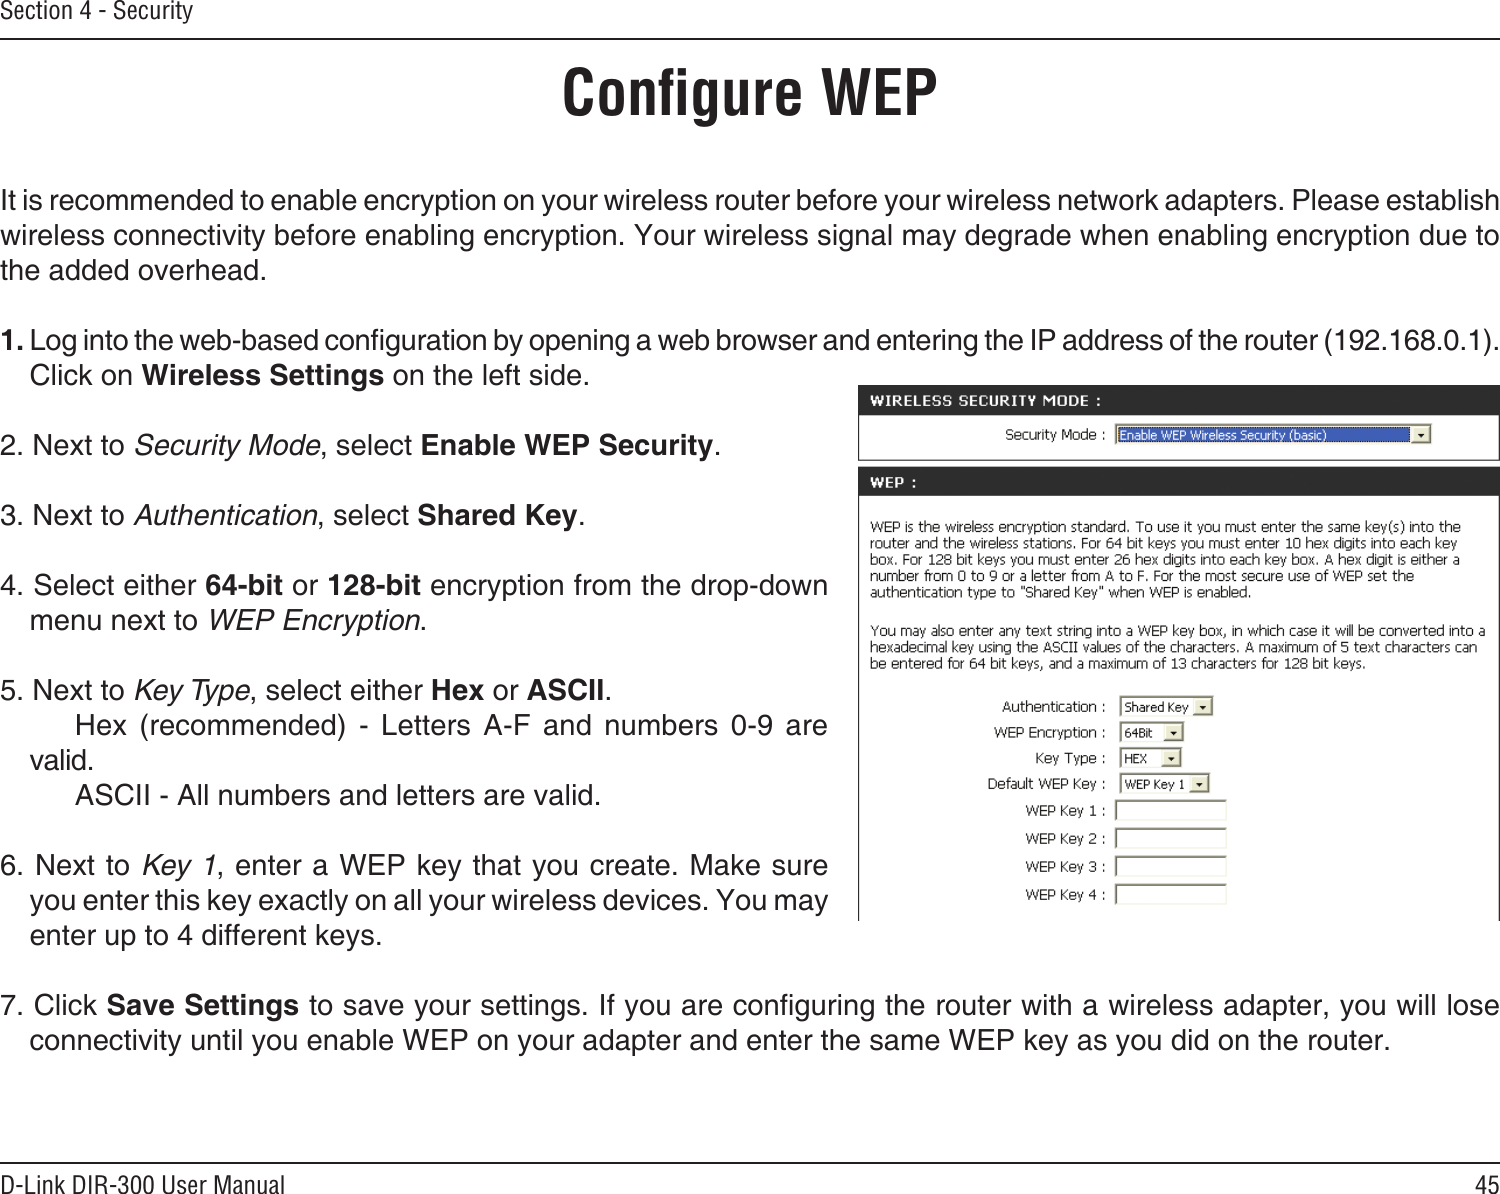 45D-Link DIR-300 User ManualSection 4 - SecurityConﬁgure WEPIt is recommended to enable encryption on your wireless router before your wireless network adapters. Please establish wireless connectivity before enabling encryption. Your wireless signal may degrade when enabling encryption due to the added overhead.1. Log into the web-based conguration by opening a web browser and entering the IP address of the router (192.168.0.1).  Click on Wireless Settings on the left side.2. Next to Security Mode, select Enable WEP Security.3. Next to Authentication, select Shared Key.4. Select either 64-bit or 128-bit encryption from the drop-down menu next to WEP Encryption. 5. Next to Key Type, select either Hex or ASCII.    Hex  (recommended)  -  Letters  A-F  and  numbers  0-9  are valid.    ASCII - All numbers and letters are valid.6. Next to Key 1, enter a WEP key that you create. Make sure you enter this key exactly on all your wireless devices. You may enter up to 4 different keys.7. Click Save Settings to save your settings. If you are conguring the router with a wireless adapter, you will lose connectivity until you enable WEP on your adapter and enter the same WEP key as you did on the router.